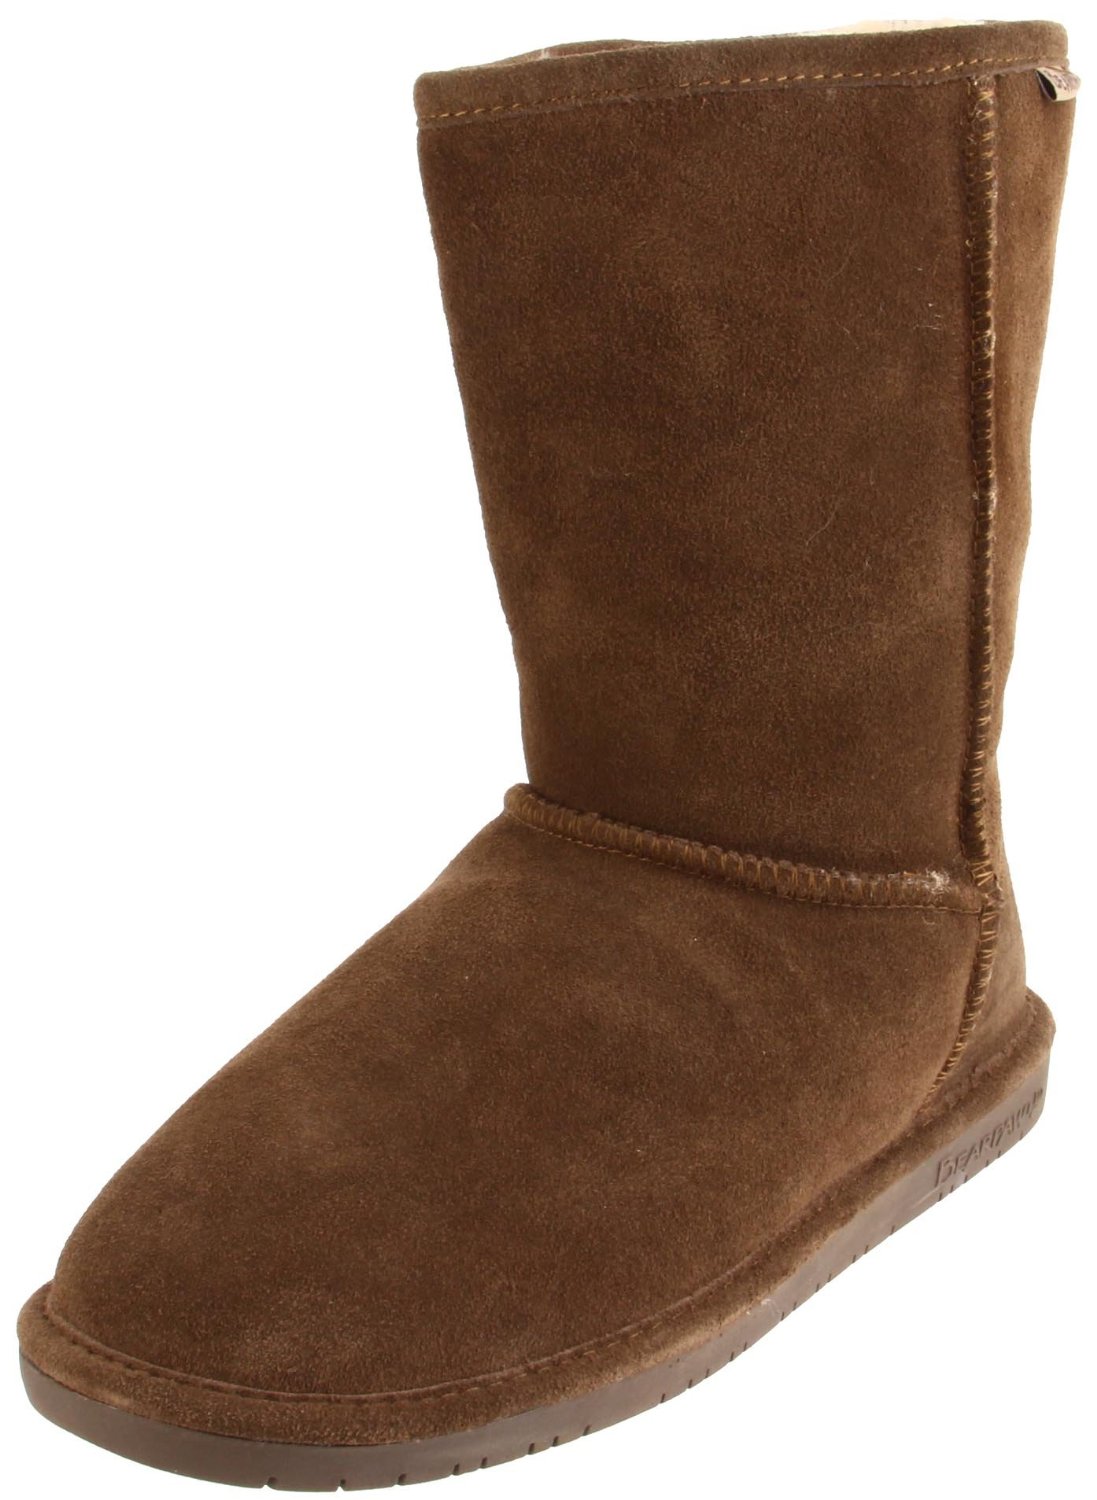 50% Off Select BEARPAW Boots & Slippers 